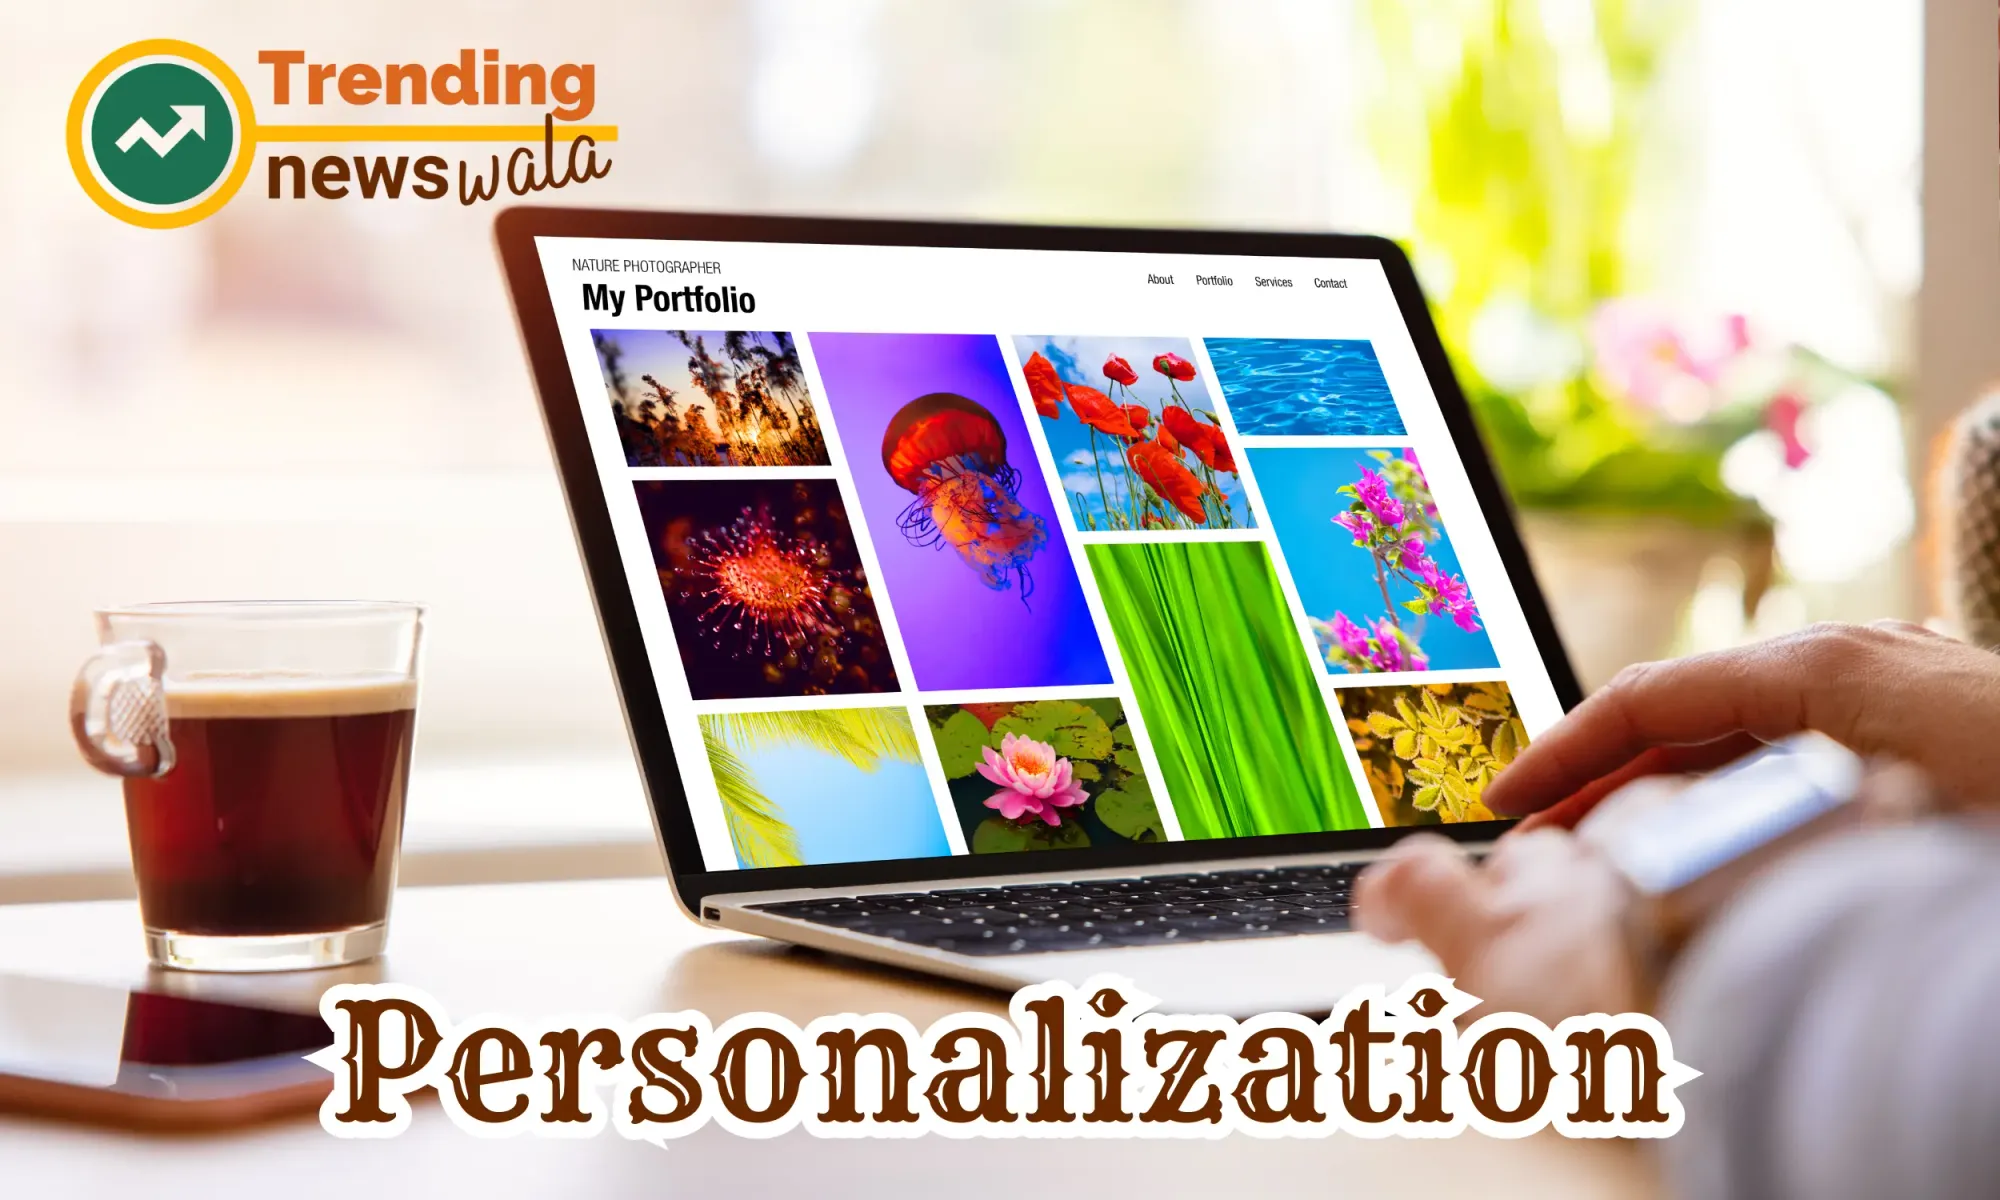 Personalization in the context of digital marketing